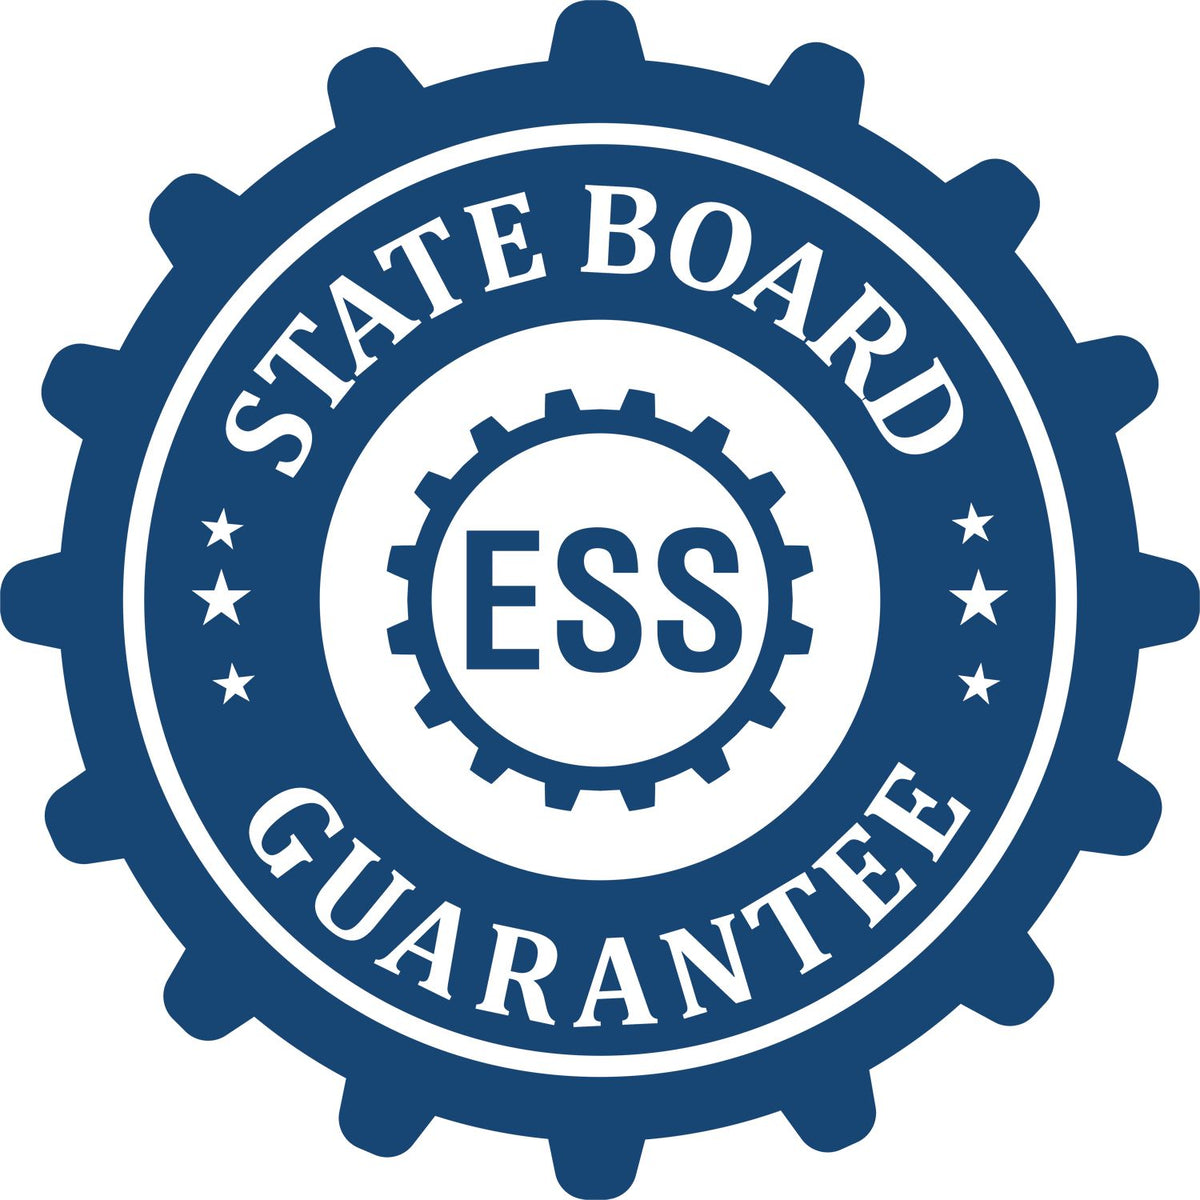 An emblem in a gear shape illustrating a state board guarantee for the Wooden Handle Virginia State Seal Notary Public Stamp product.